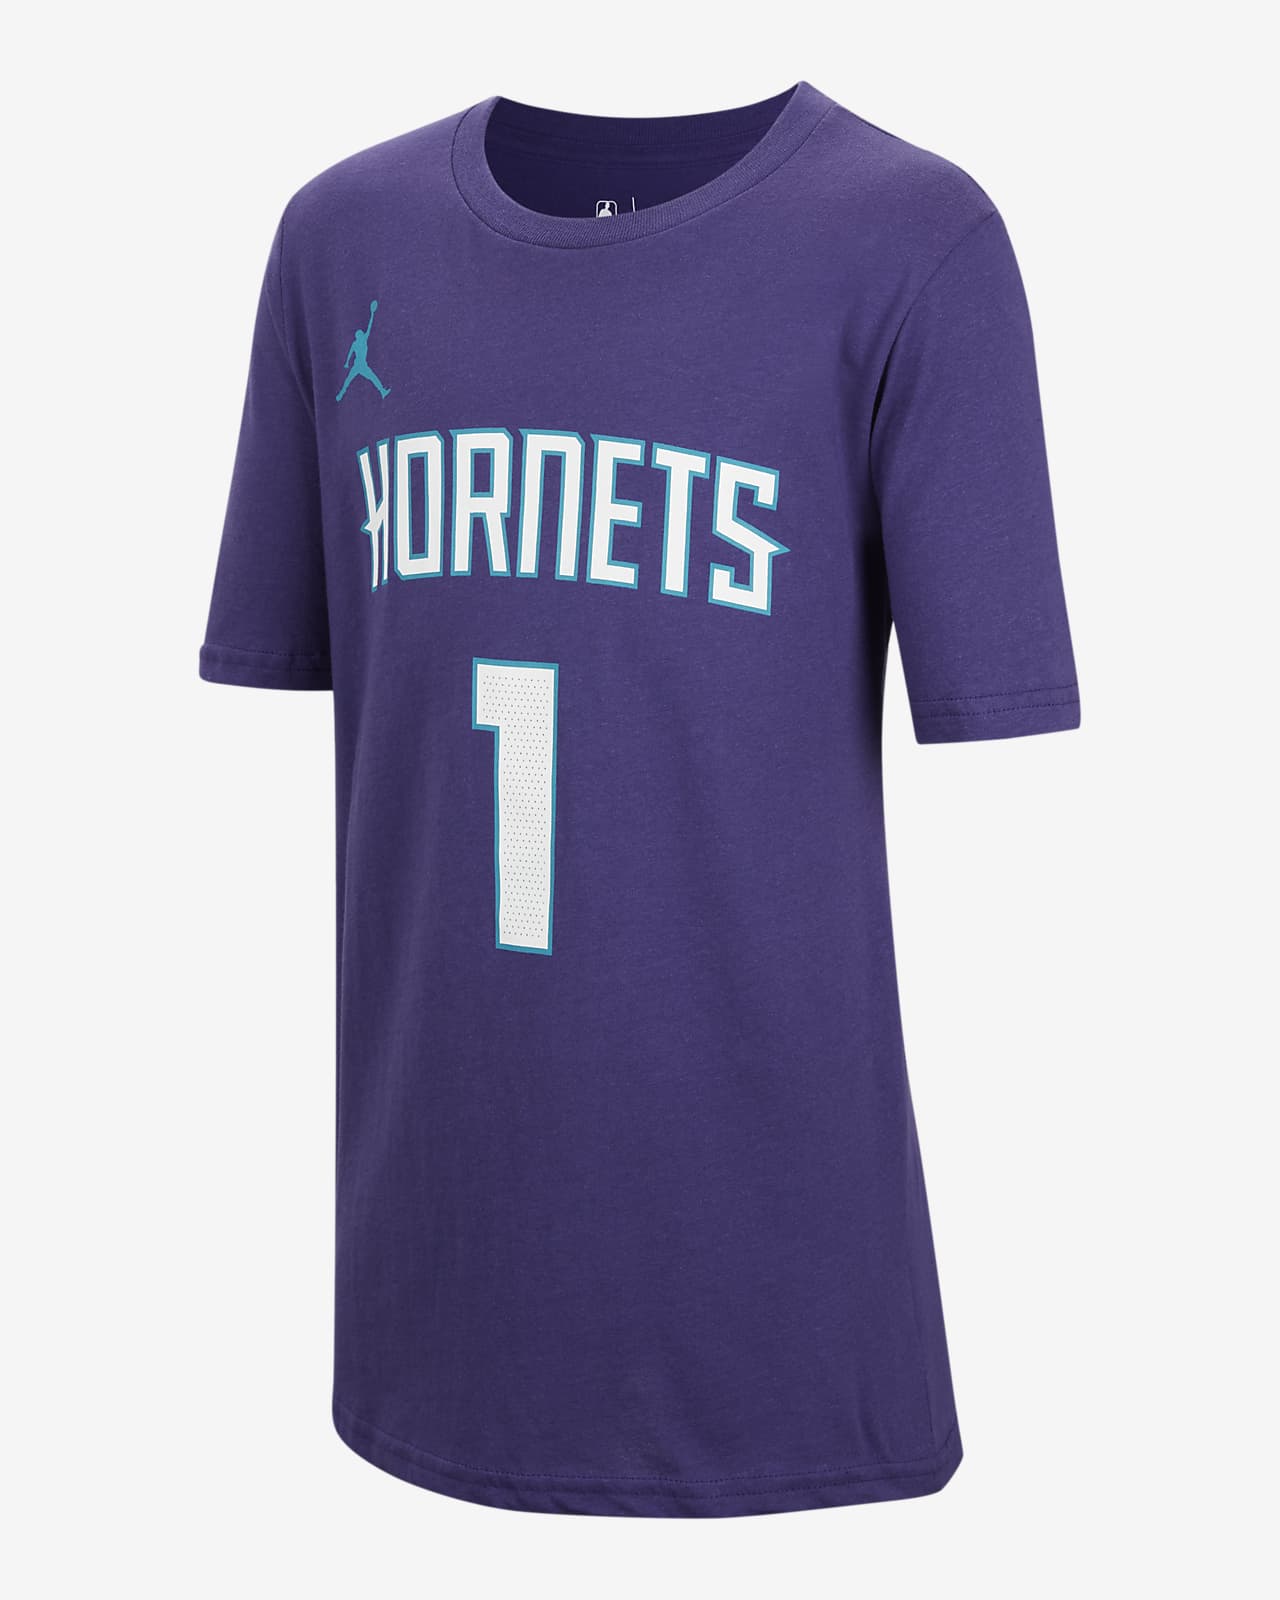 Youth Jordan Brand LaMelo Ball Purple Charlotte Hornets Statement Edition Name & Number Player T-Shirt